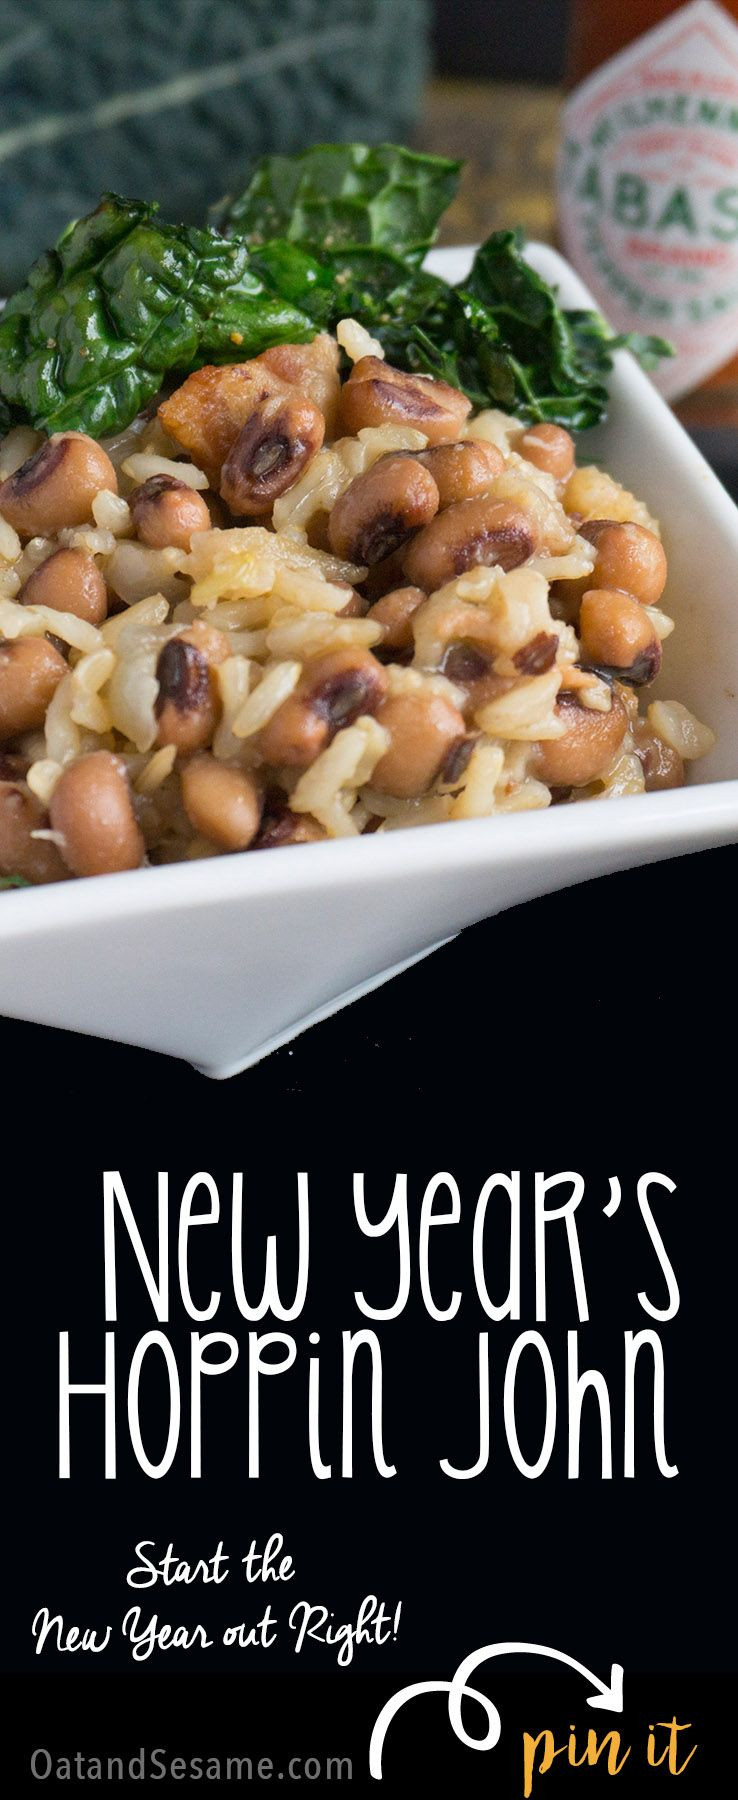 New Years Day Dinner Tradition
 Skillet Hoppin John Southern Black Eyed Peas and Rice